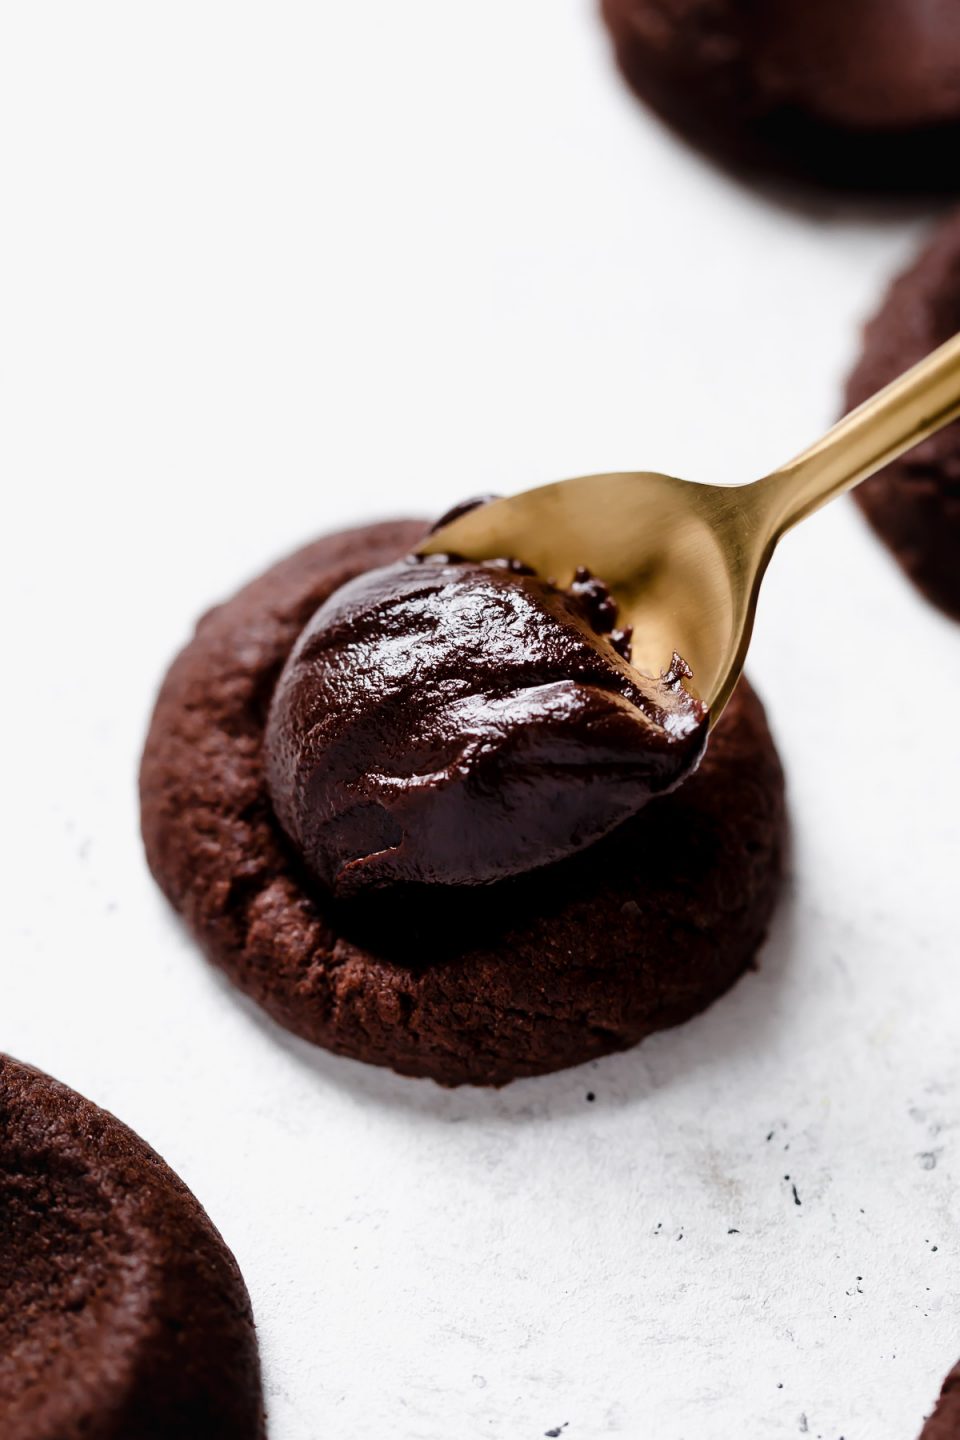 Gold spoon adding chocolate ganache to a baked chocolate thumbprint cookie.